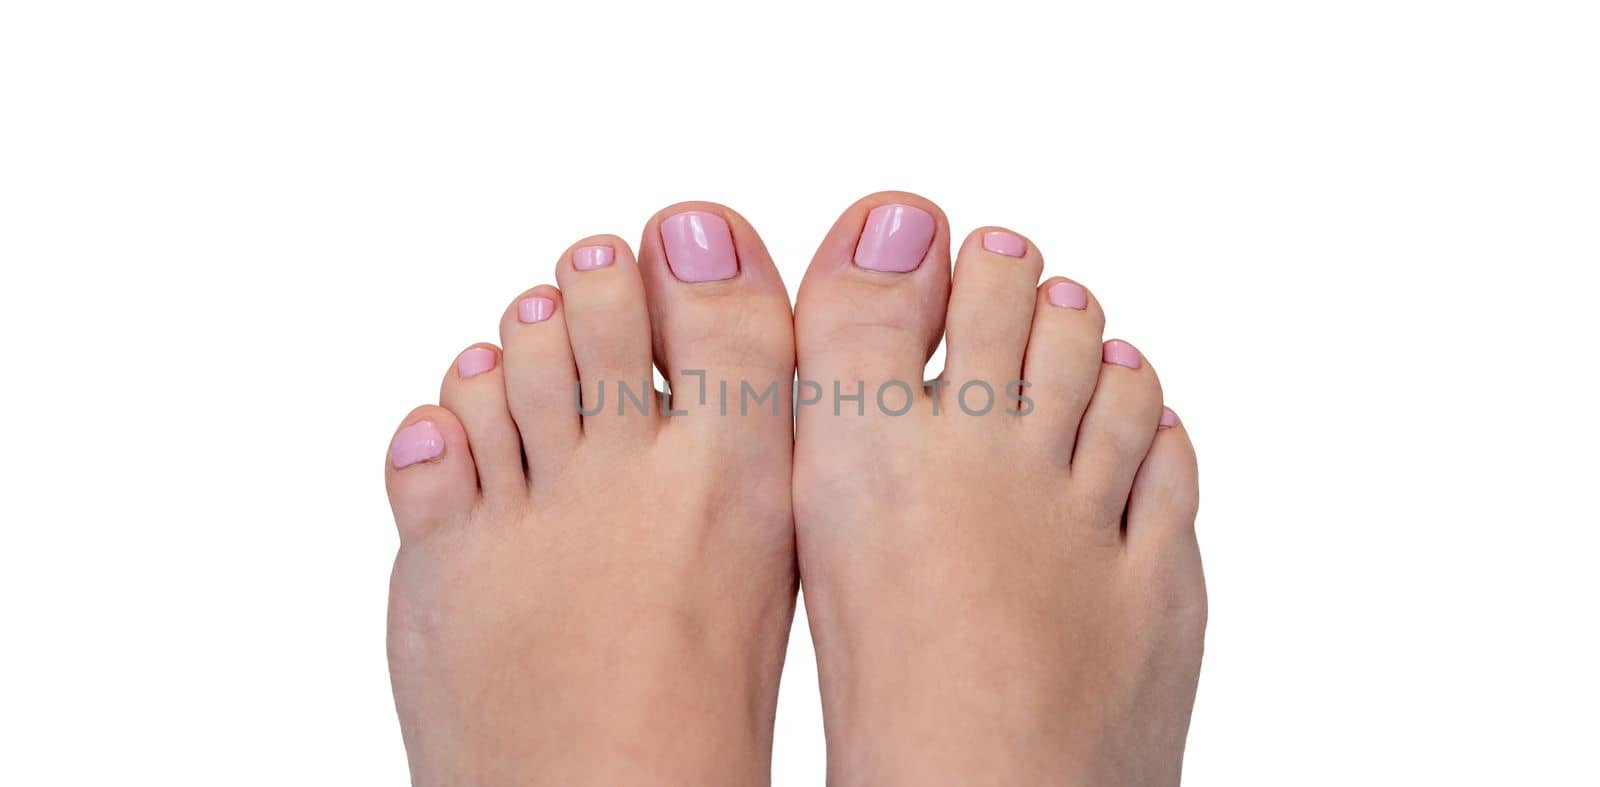 Closeup of feet and toes. Healthy bare feet and footcare concept